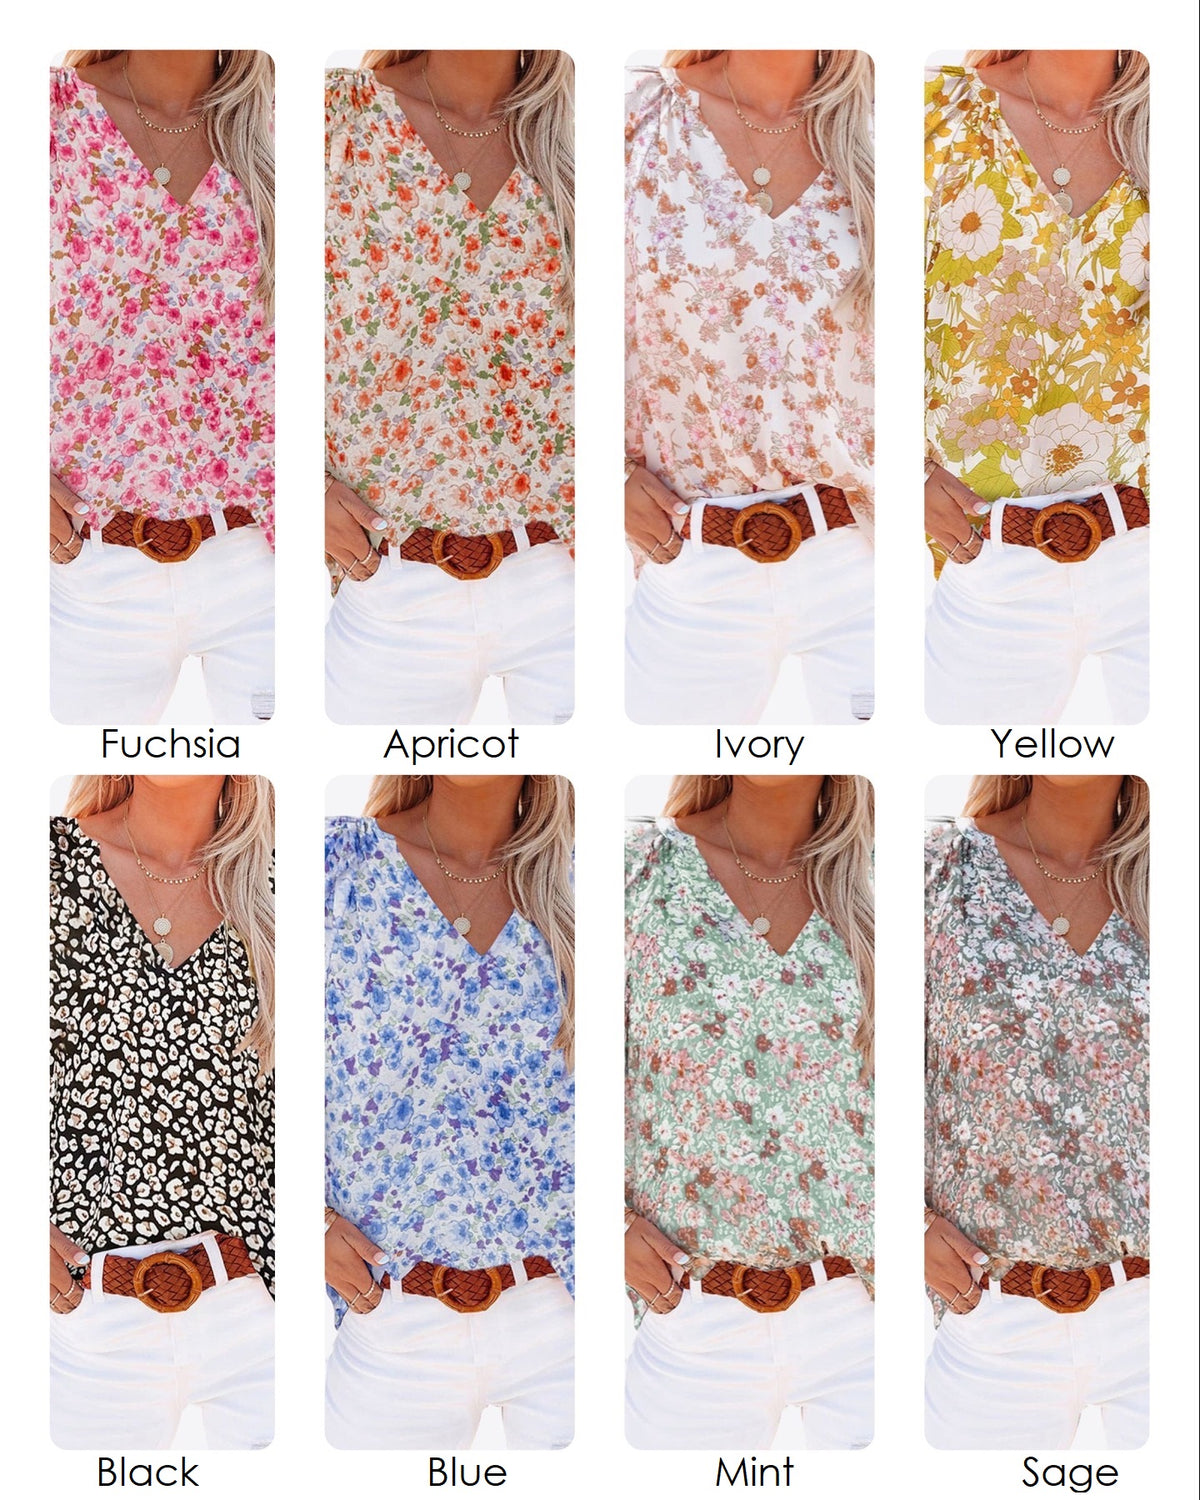 Felicity Floral Flutter Sleeve Blouse V-Neck Womens Feminine Top Short Sleeve Flower Print Floral Pattern in 8 colors: Black, Blue, Mint Green, Sage Green, Fuchsia Hot Pink, Apricot Orange Cream, Ivory Cream Light Beige Tan, and Yellow Mustard 